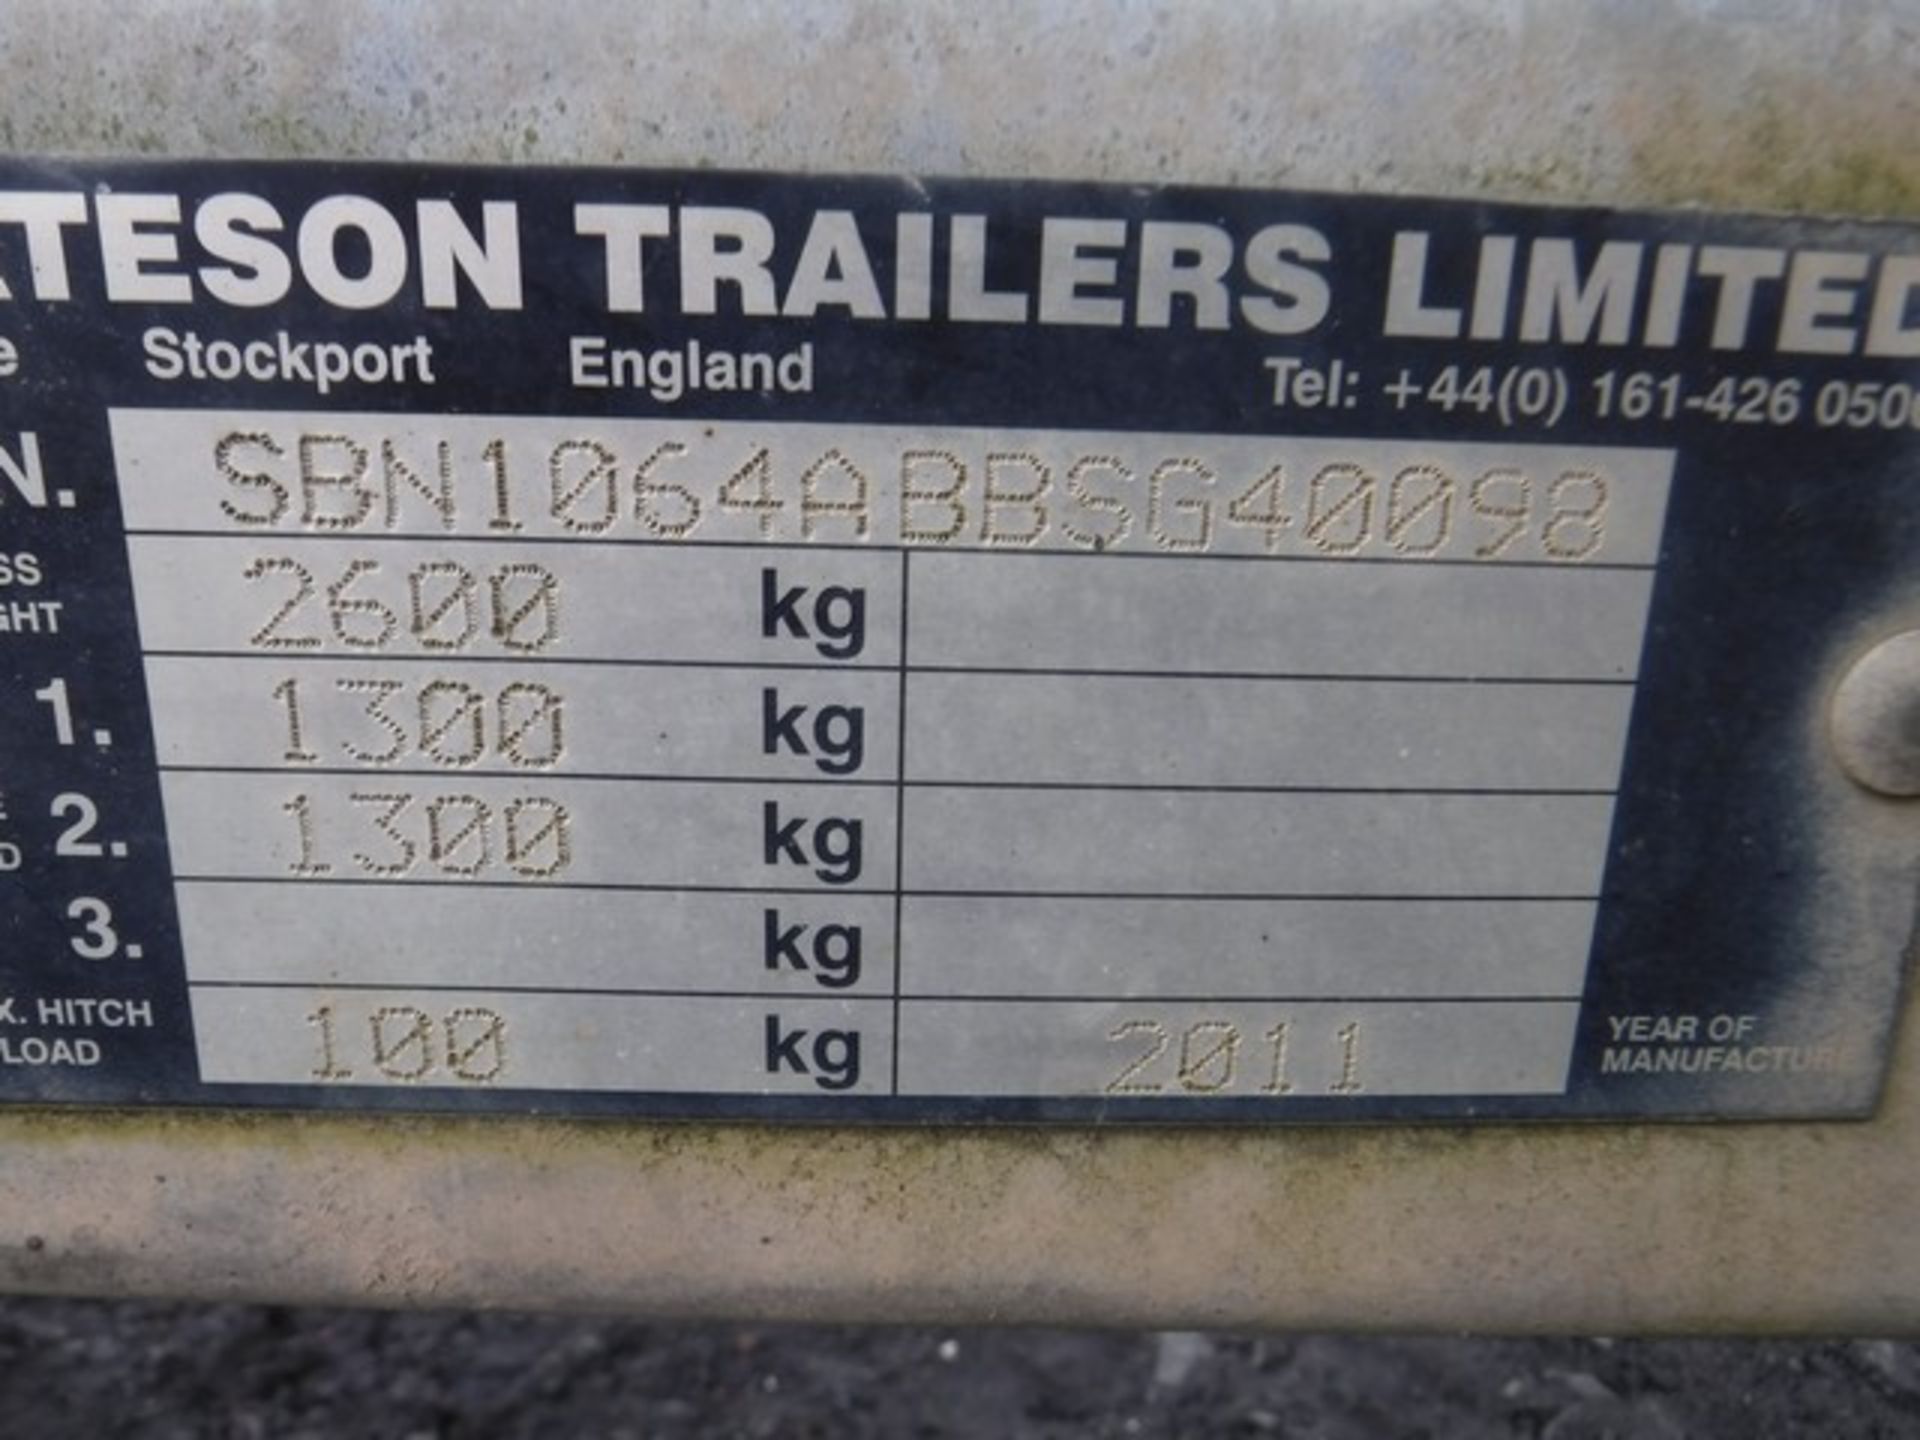 BATESON 12' x 6' twin axle plant trailer with mesh ramp S/N SG40098 - Image 3 of 3